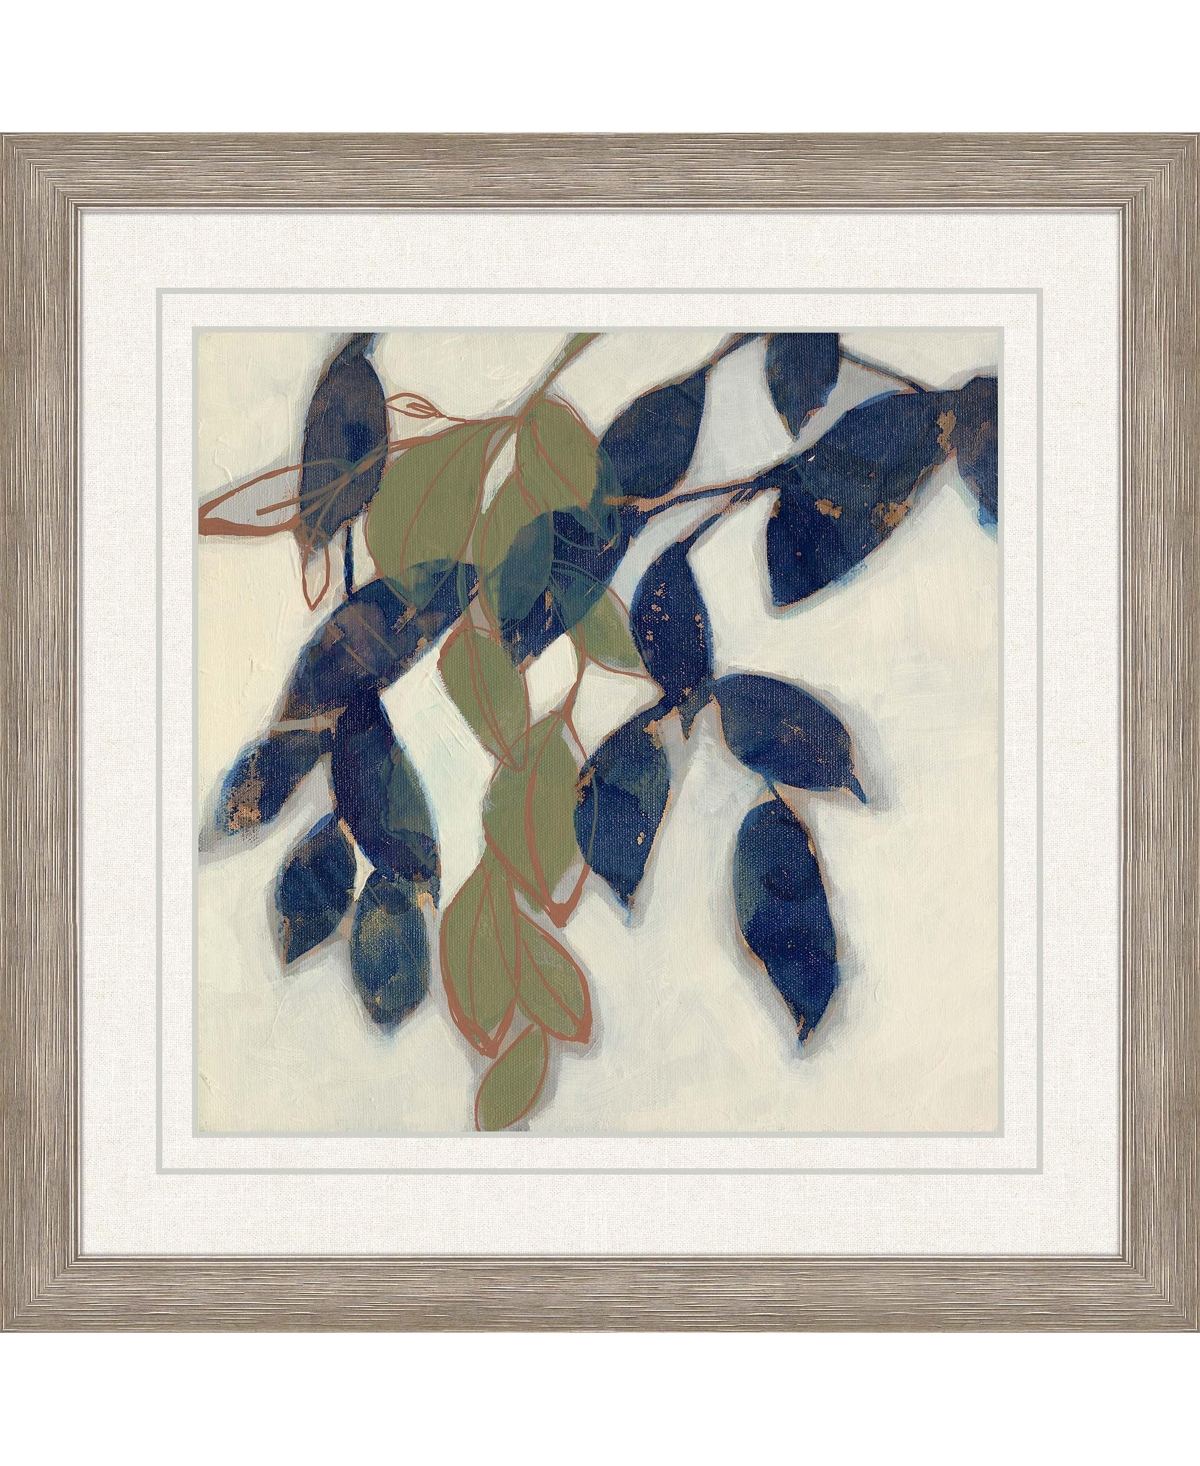 Paragon Picture Gallery Entwined Leaves I Framed Art In Blue